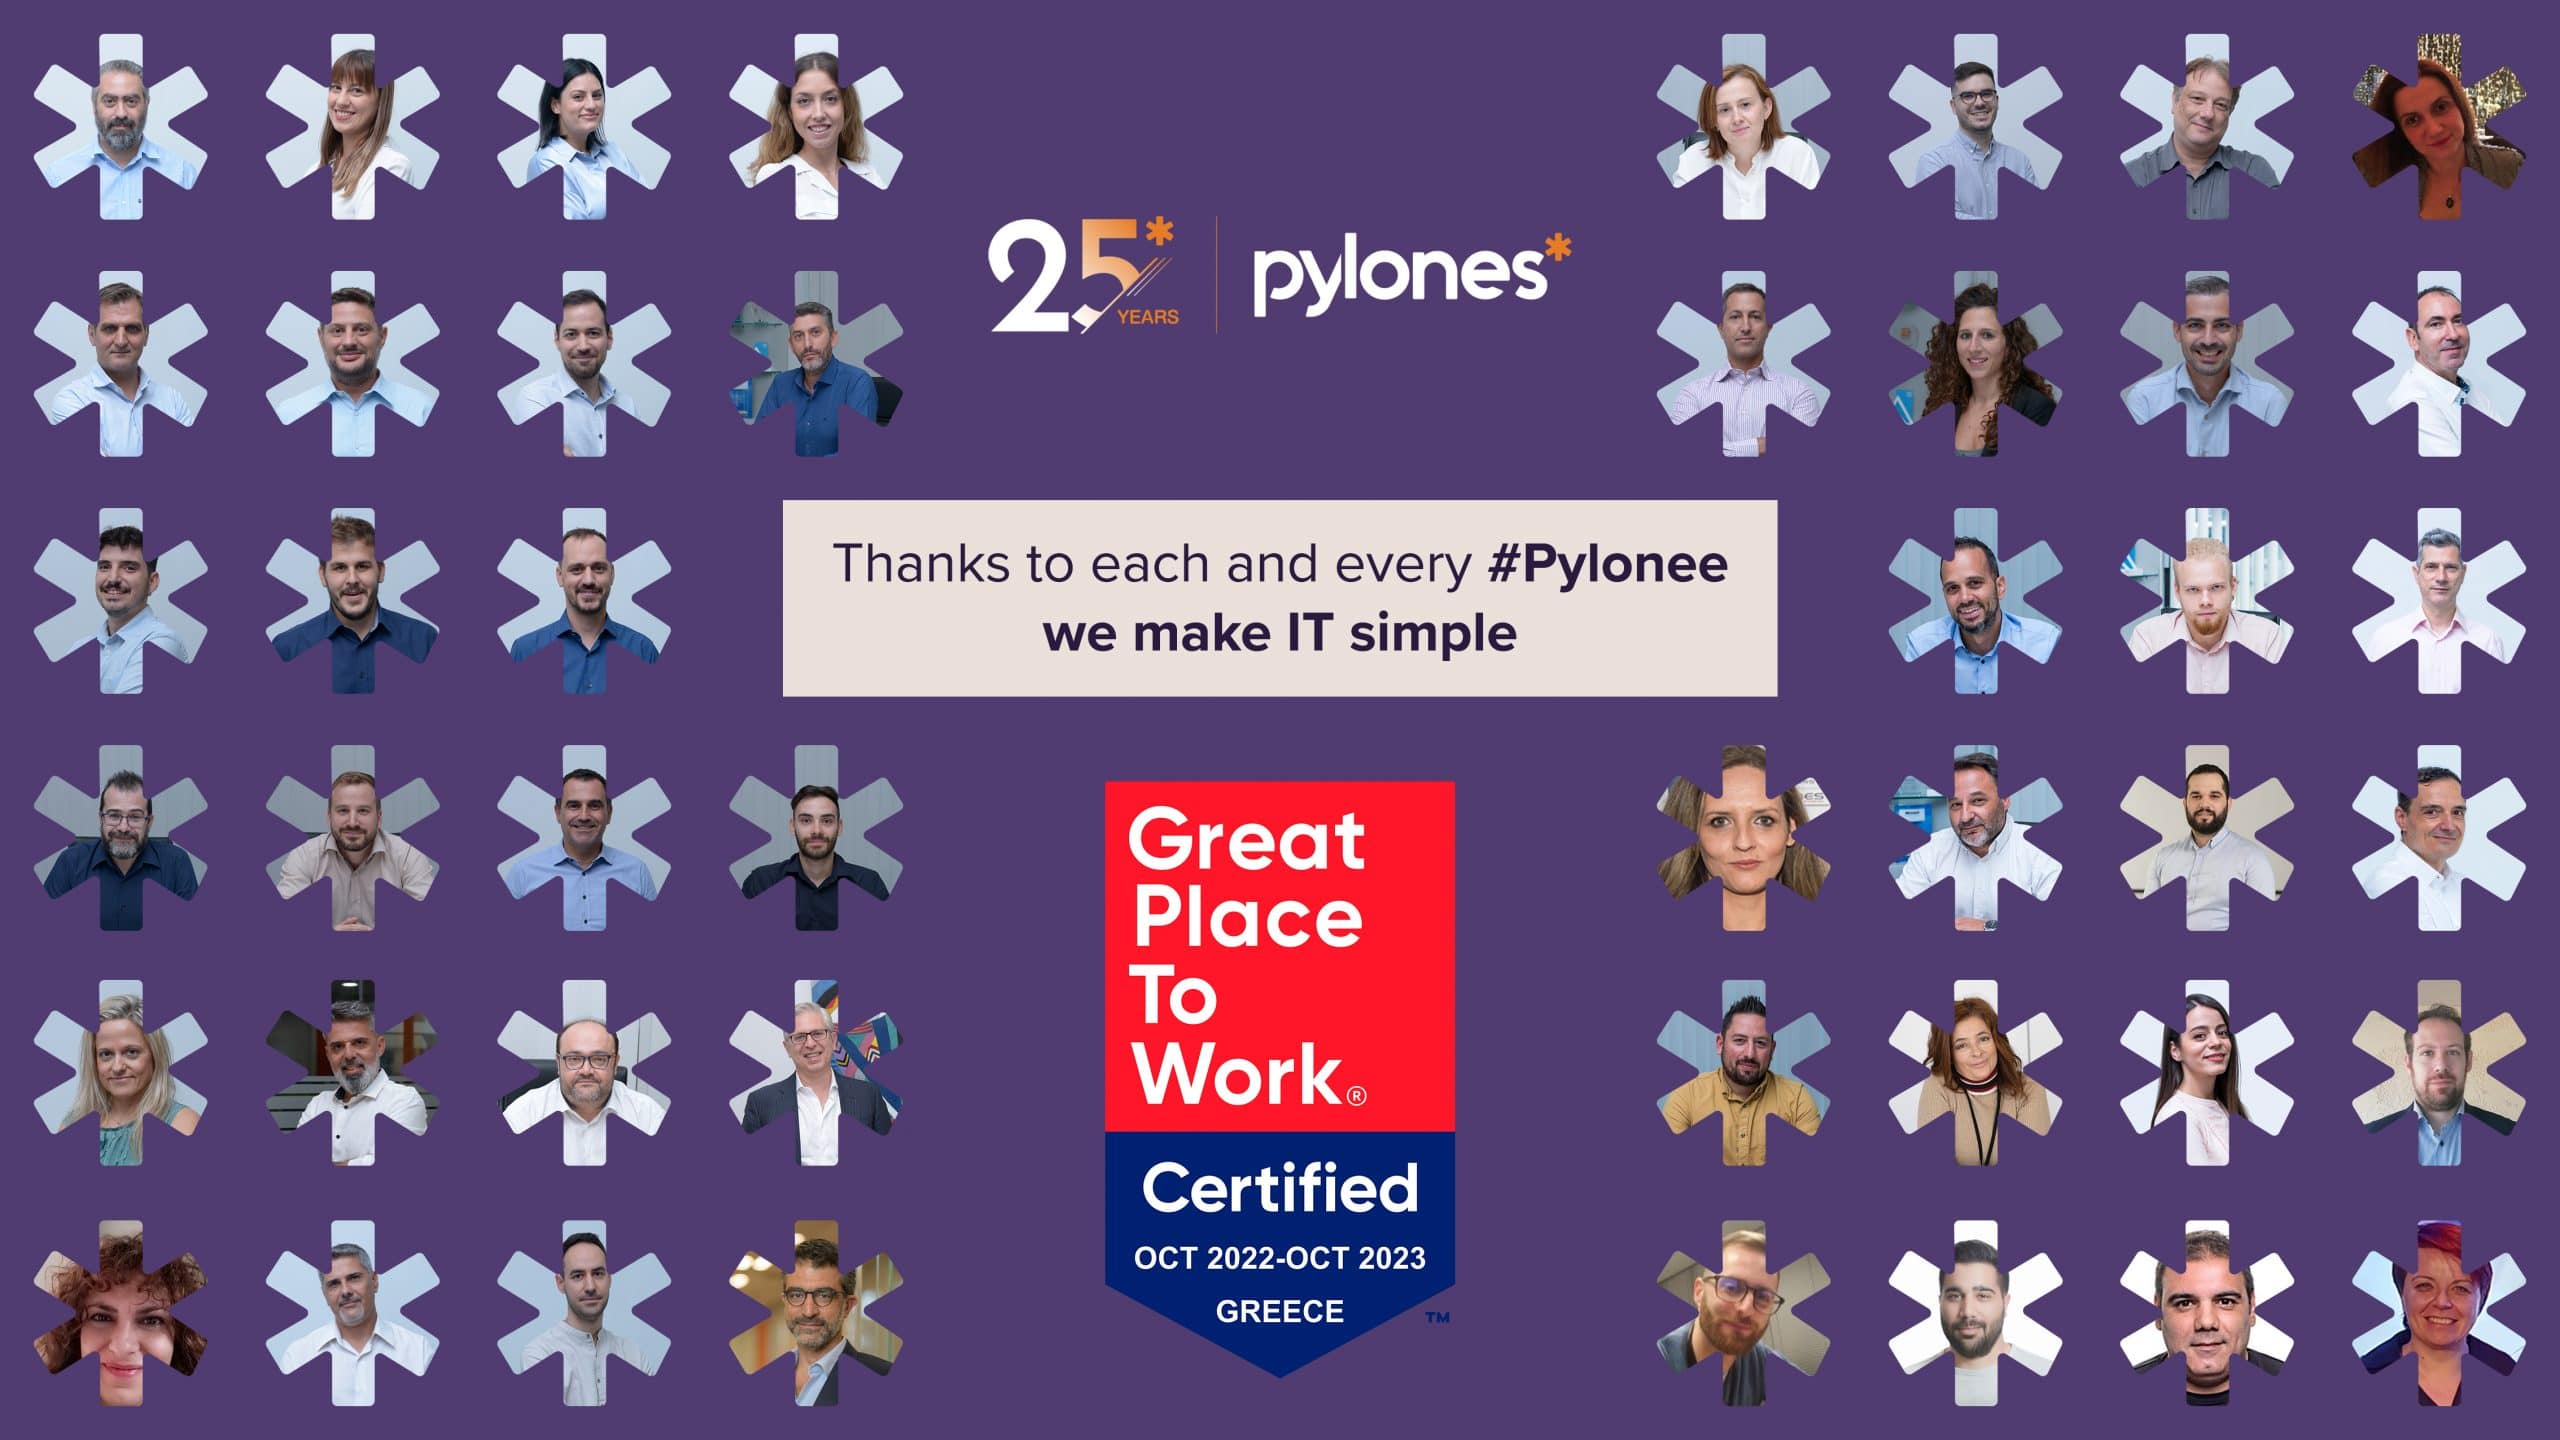 Great Place to Work - Pylones